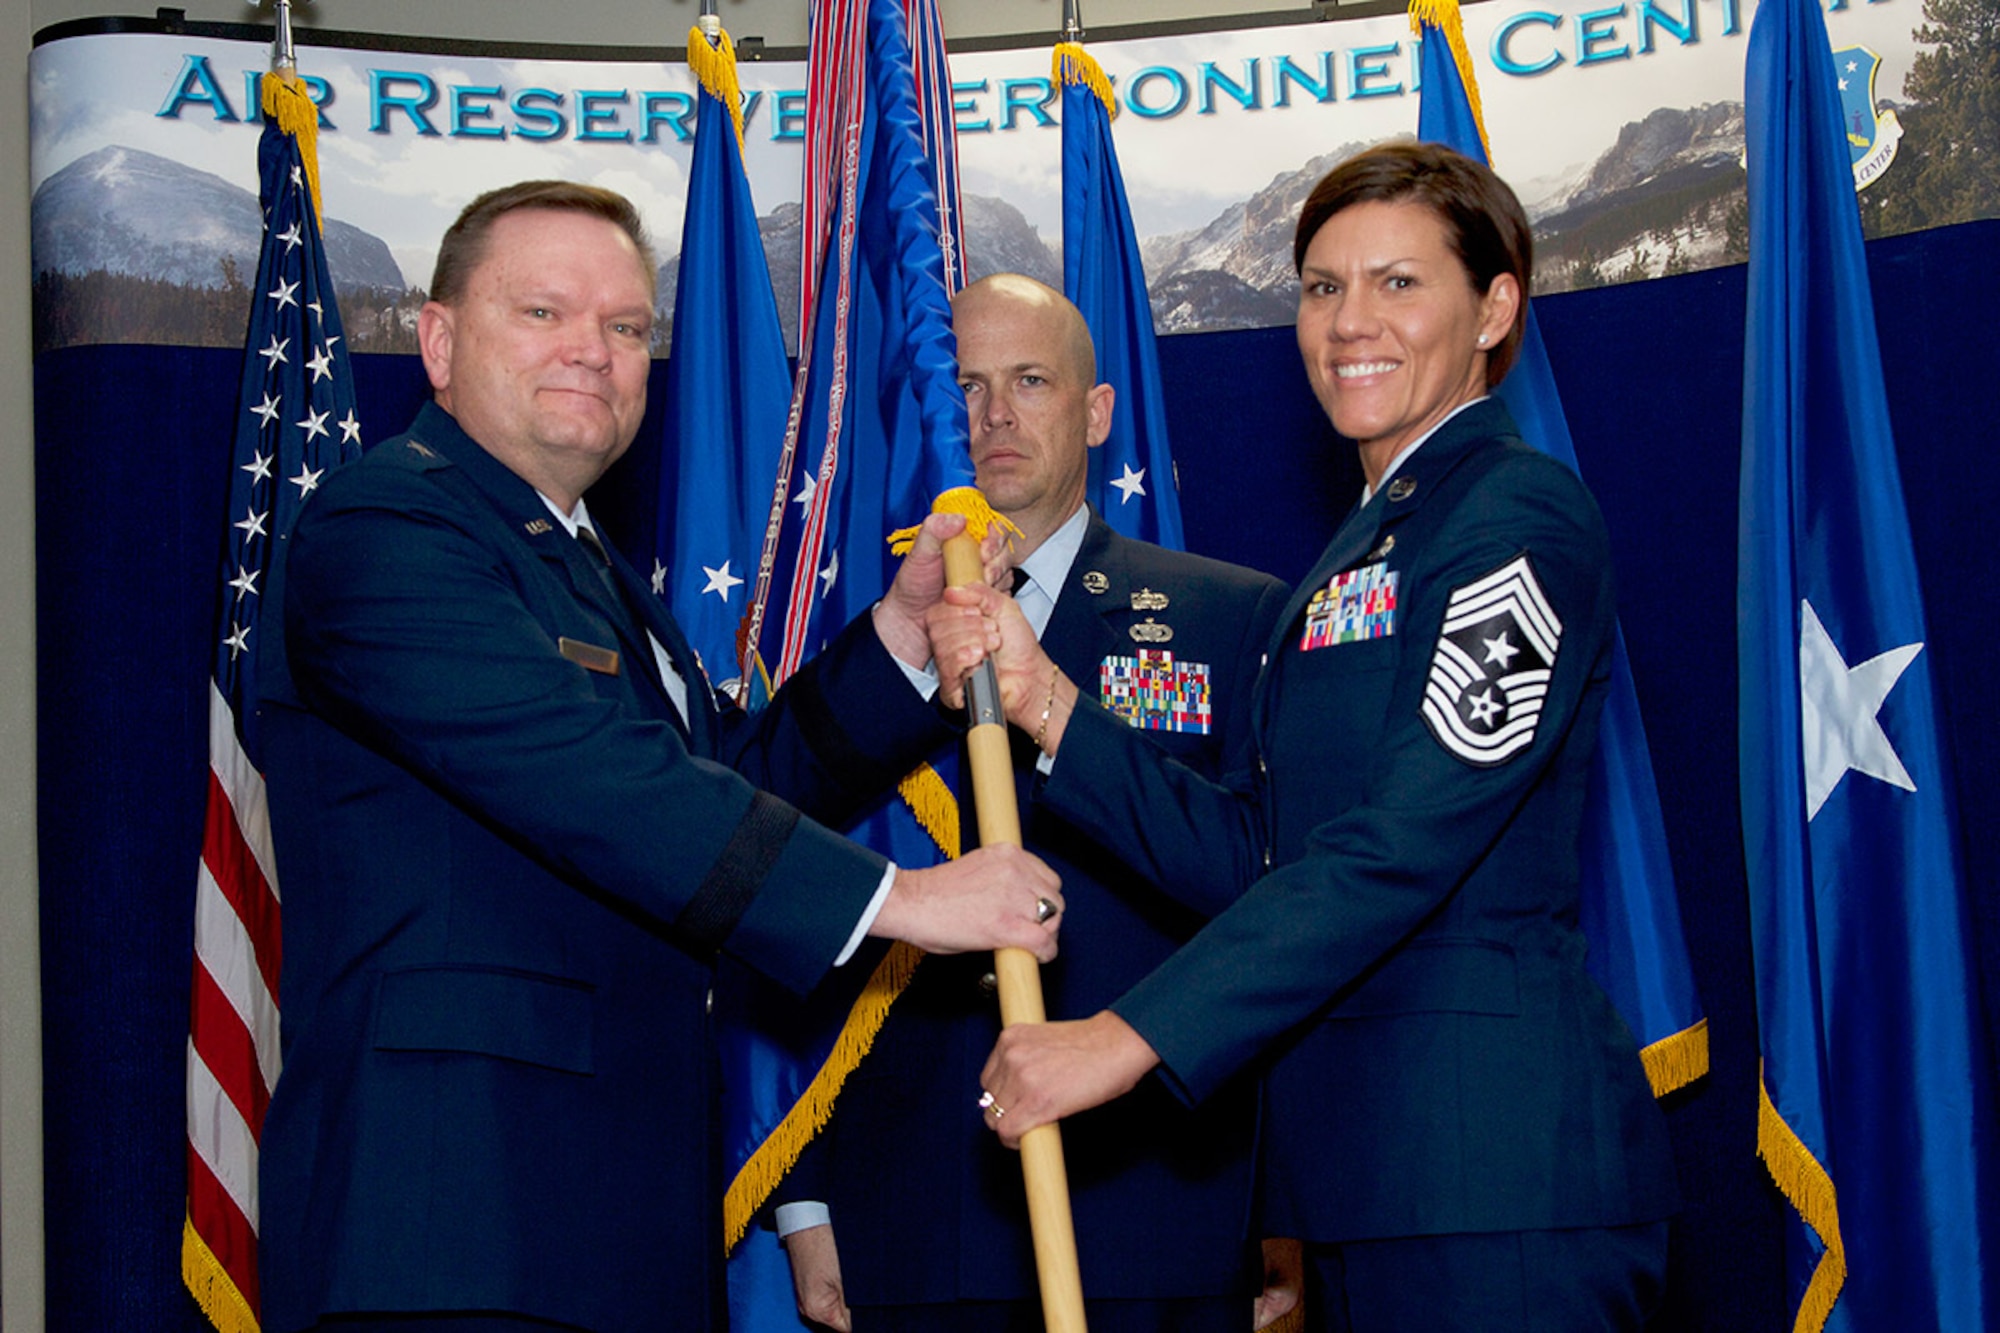 Brig. Gen. Samuel Mahaney, Air Reserve Personnel Center commander, hands the ARPC guidon to Chief Master Sgt. Ruth E. Flores, ARPC command chief, as Senior Master Sgt. John Neeley, ARPC first sergeant, stands by during an assumption of responsibility ceremony at Buckley Air Force Base, Aurora, Colo., Jan. 31, 2014. In December 2013 Chief Master Sgt. Ruth E. Flores became the Air Reserve Personnel Center’s first female command chief to represent the highest level of enlisted leadership here. As command chief, she is involved in advising the commander on all matters concerning the health, morale, welfare and effective utilization of more than 400 active duty, guardsmen, civilian employees and reserve enlisted members. (U.S. Air Force photo/Tech. Sgt. Mark Balli)